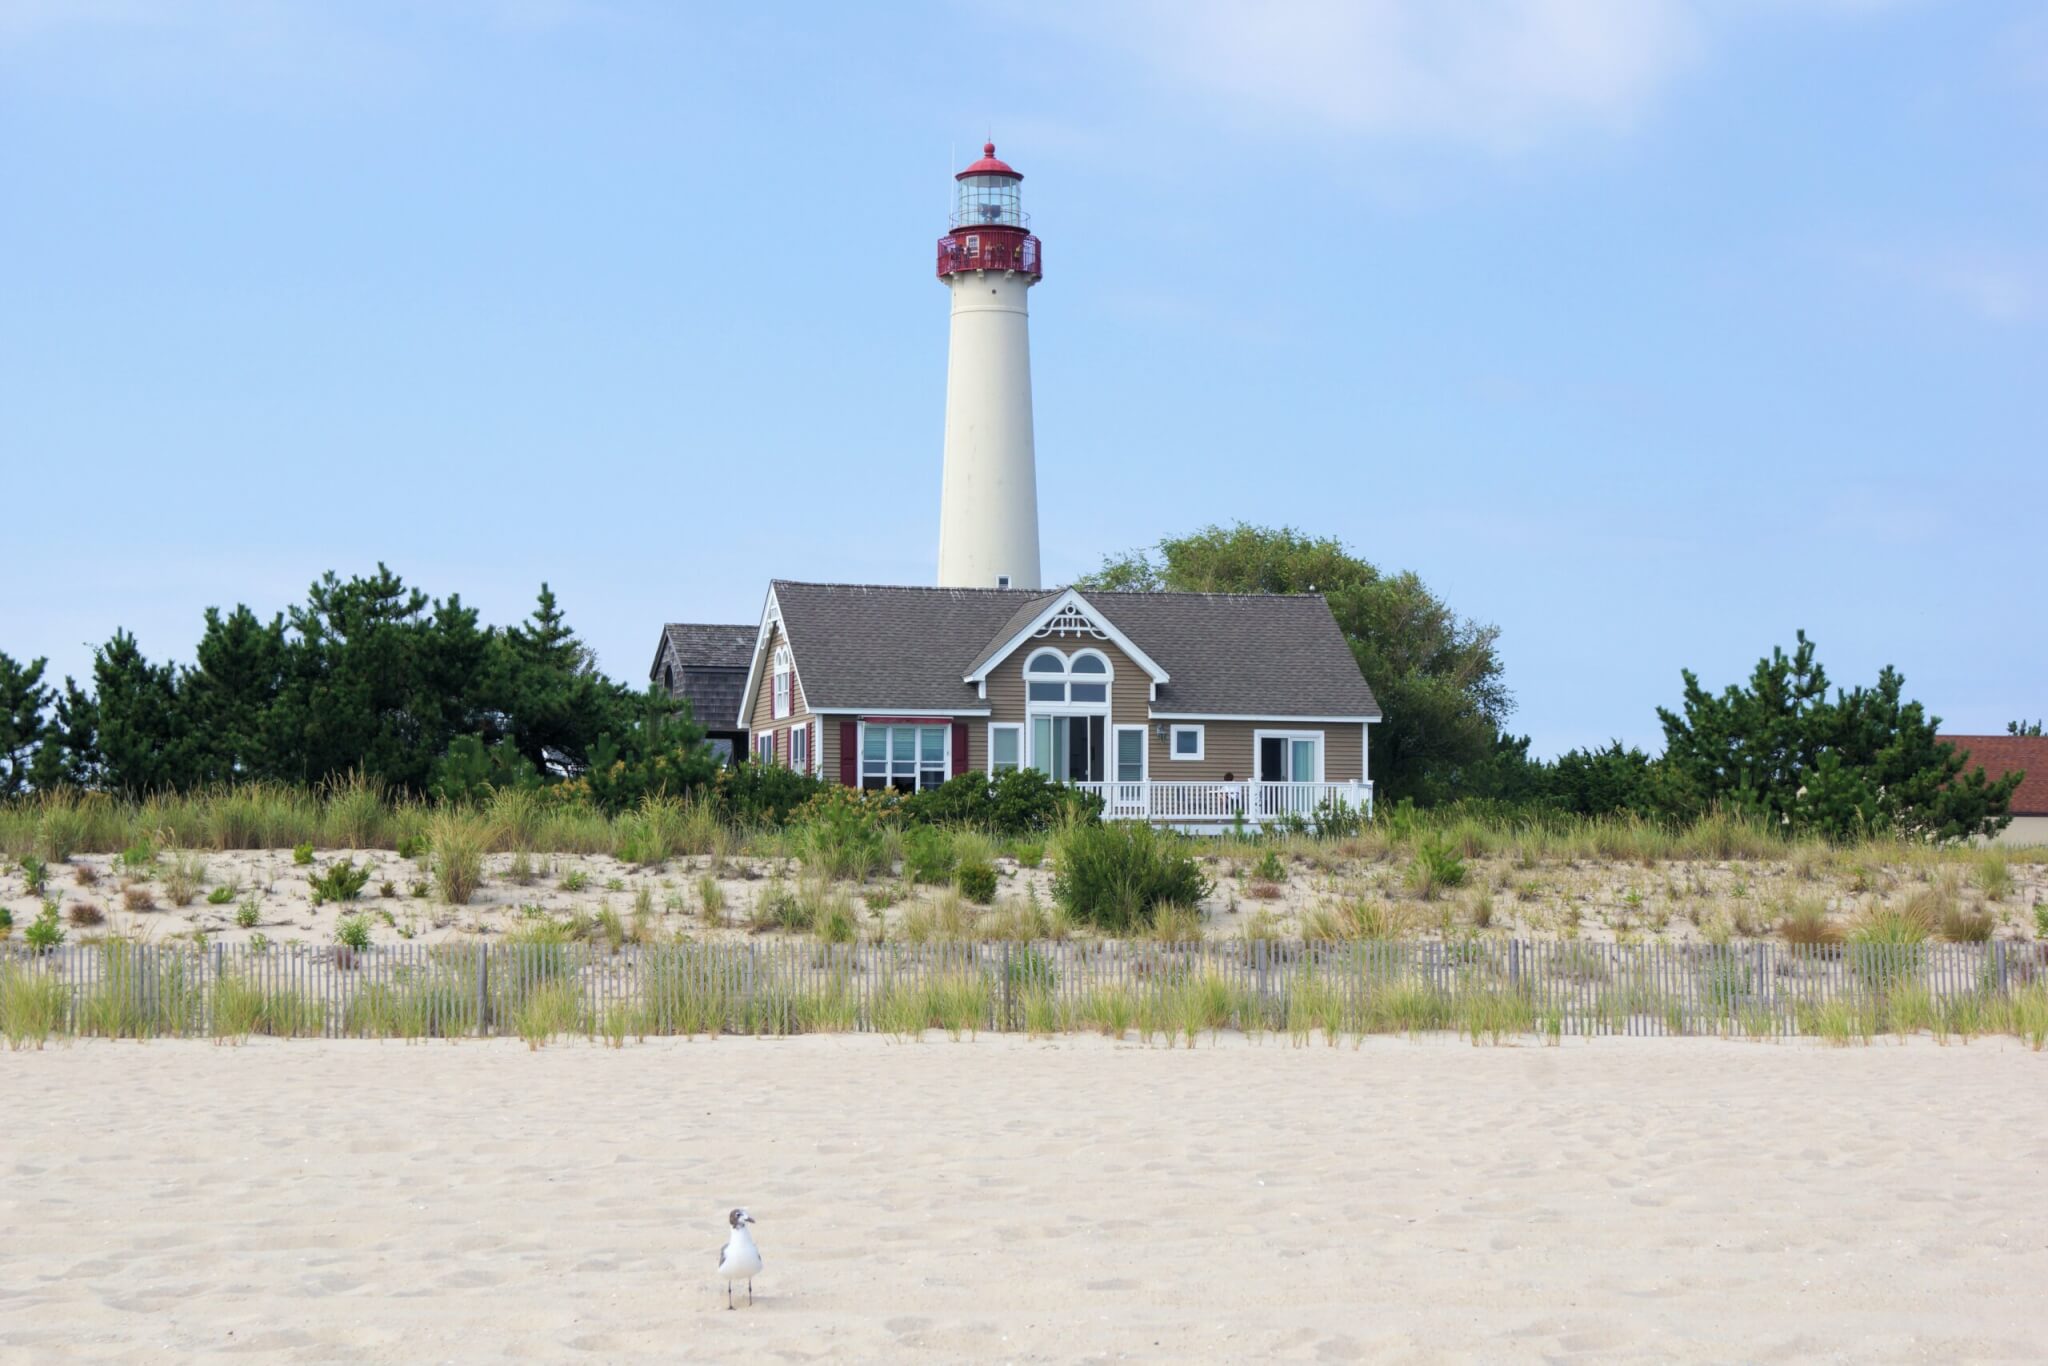 Lighthouse in Cape May, New Jersey